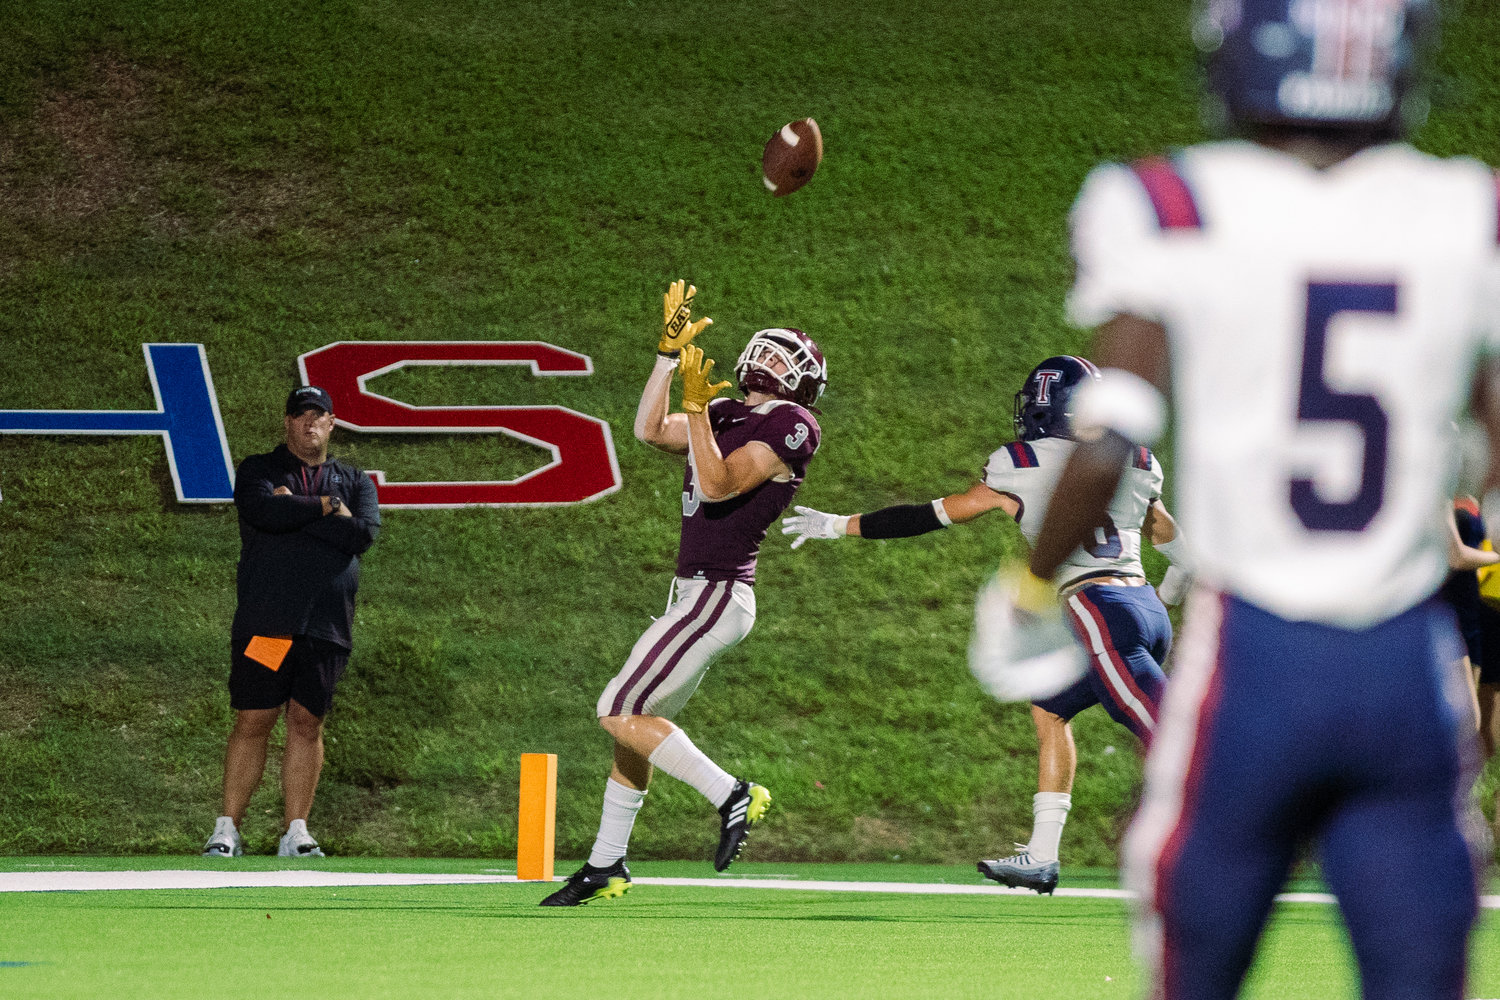 Cinco Ranch’s Seth Salverino makes a catch for a touchdown during Friday’s game between Cinco Ranch and Tompkins at Rhodes Stadium.